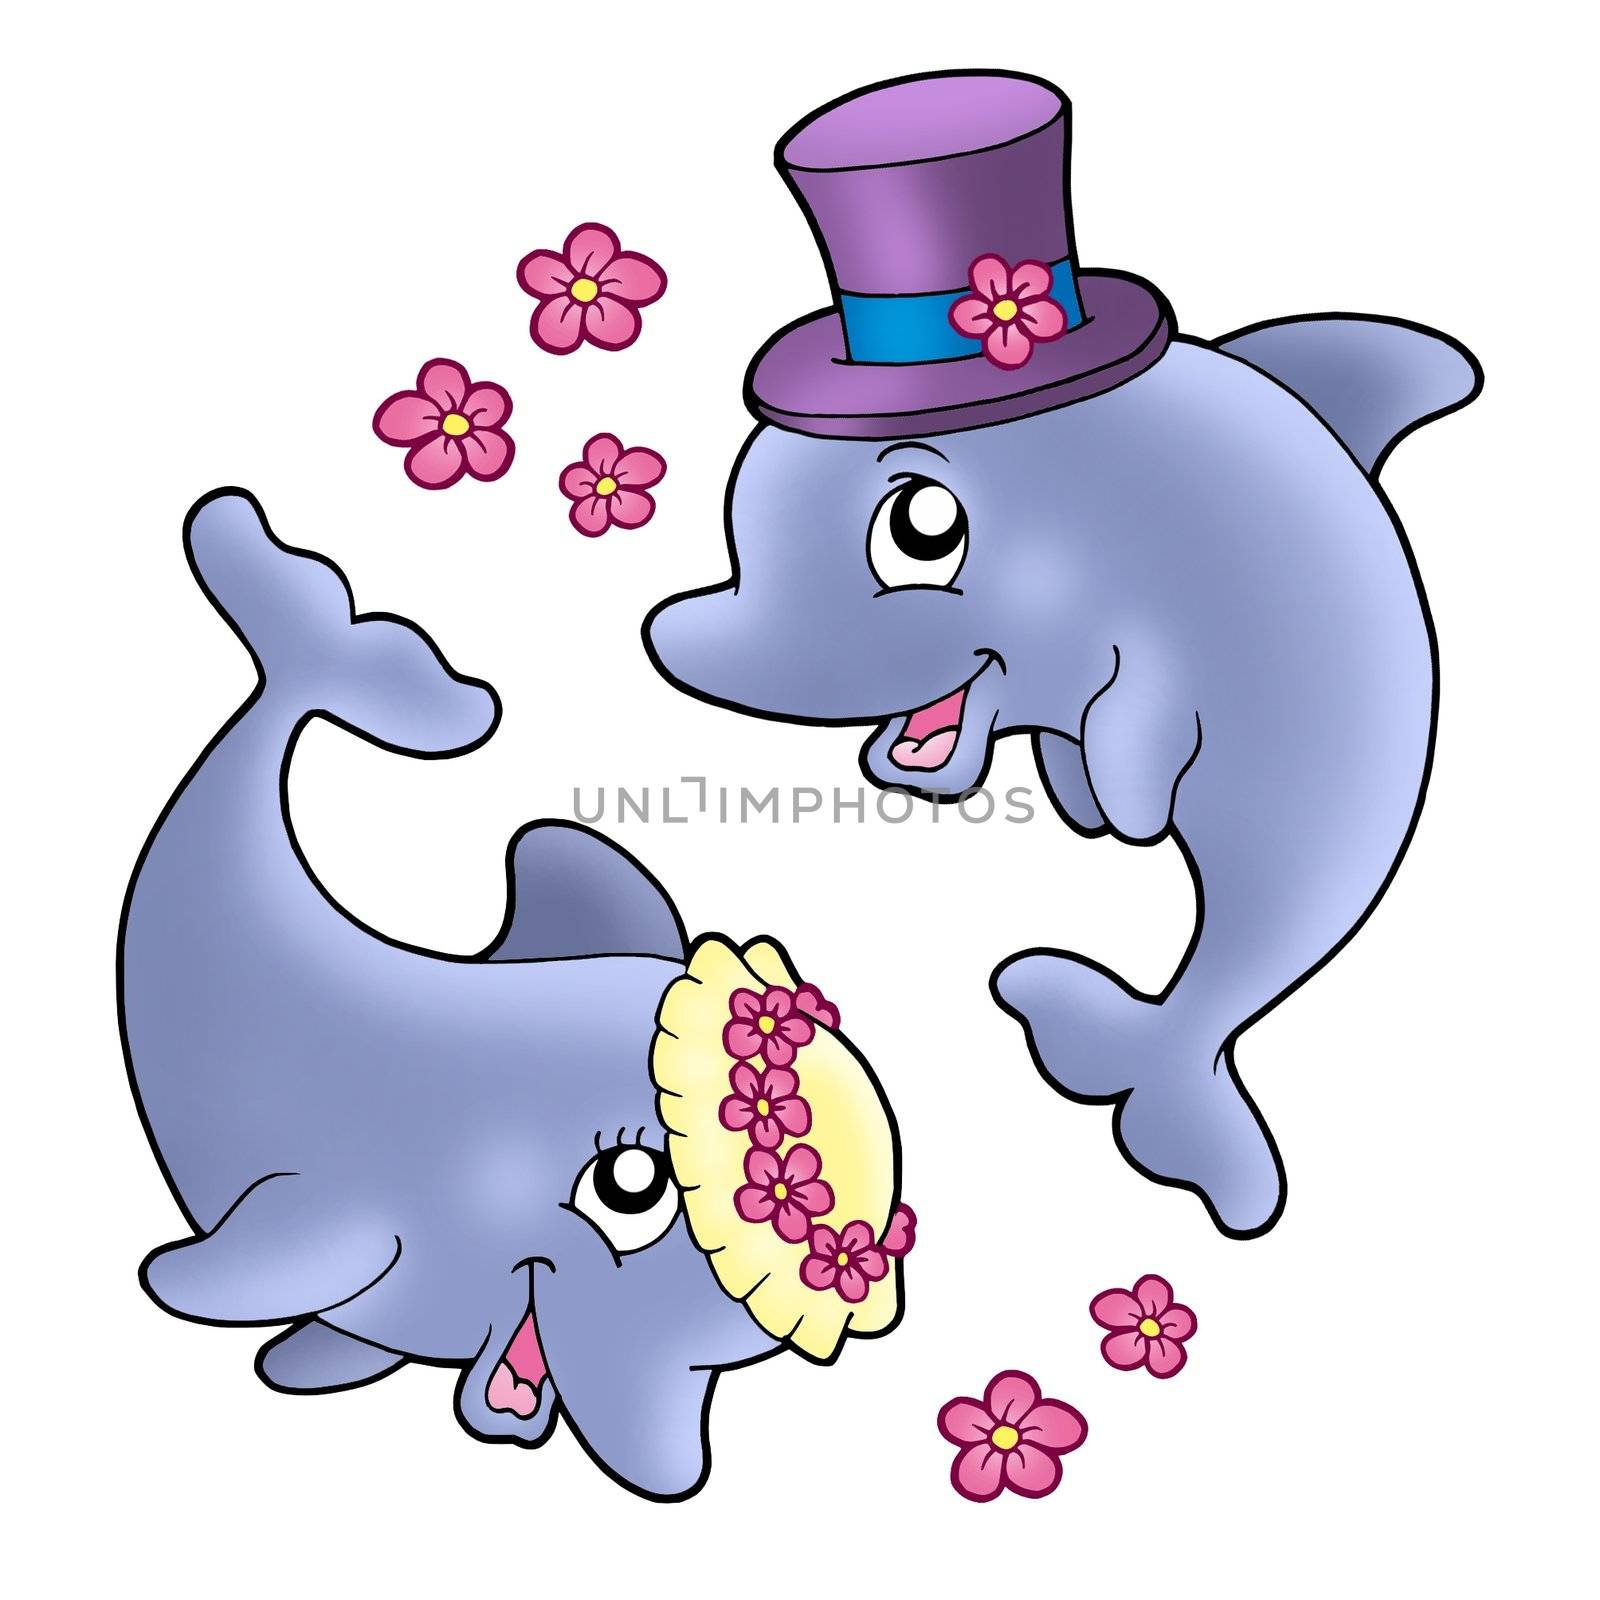 Pair of cute wedding dolphins - color illustration.